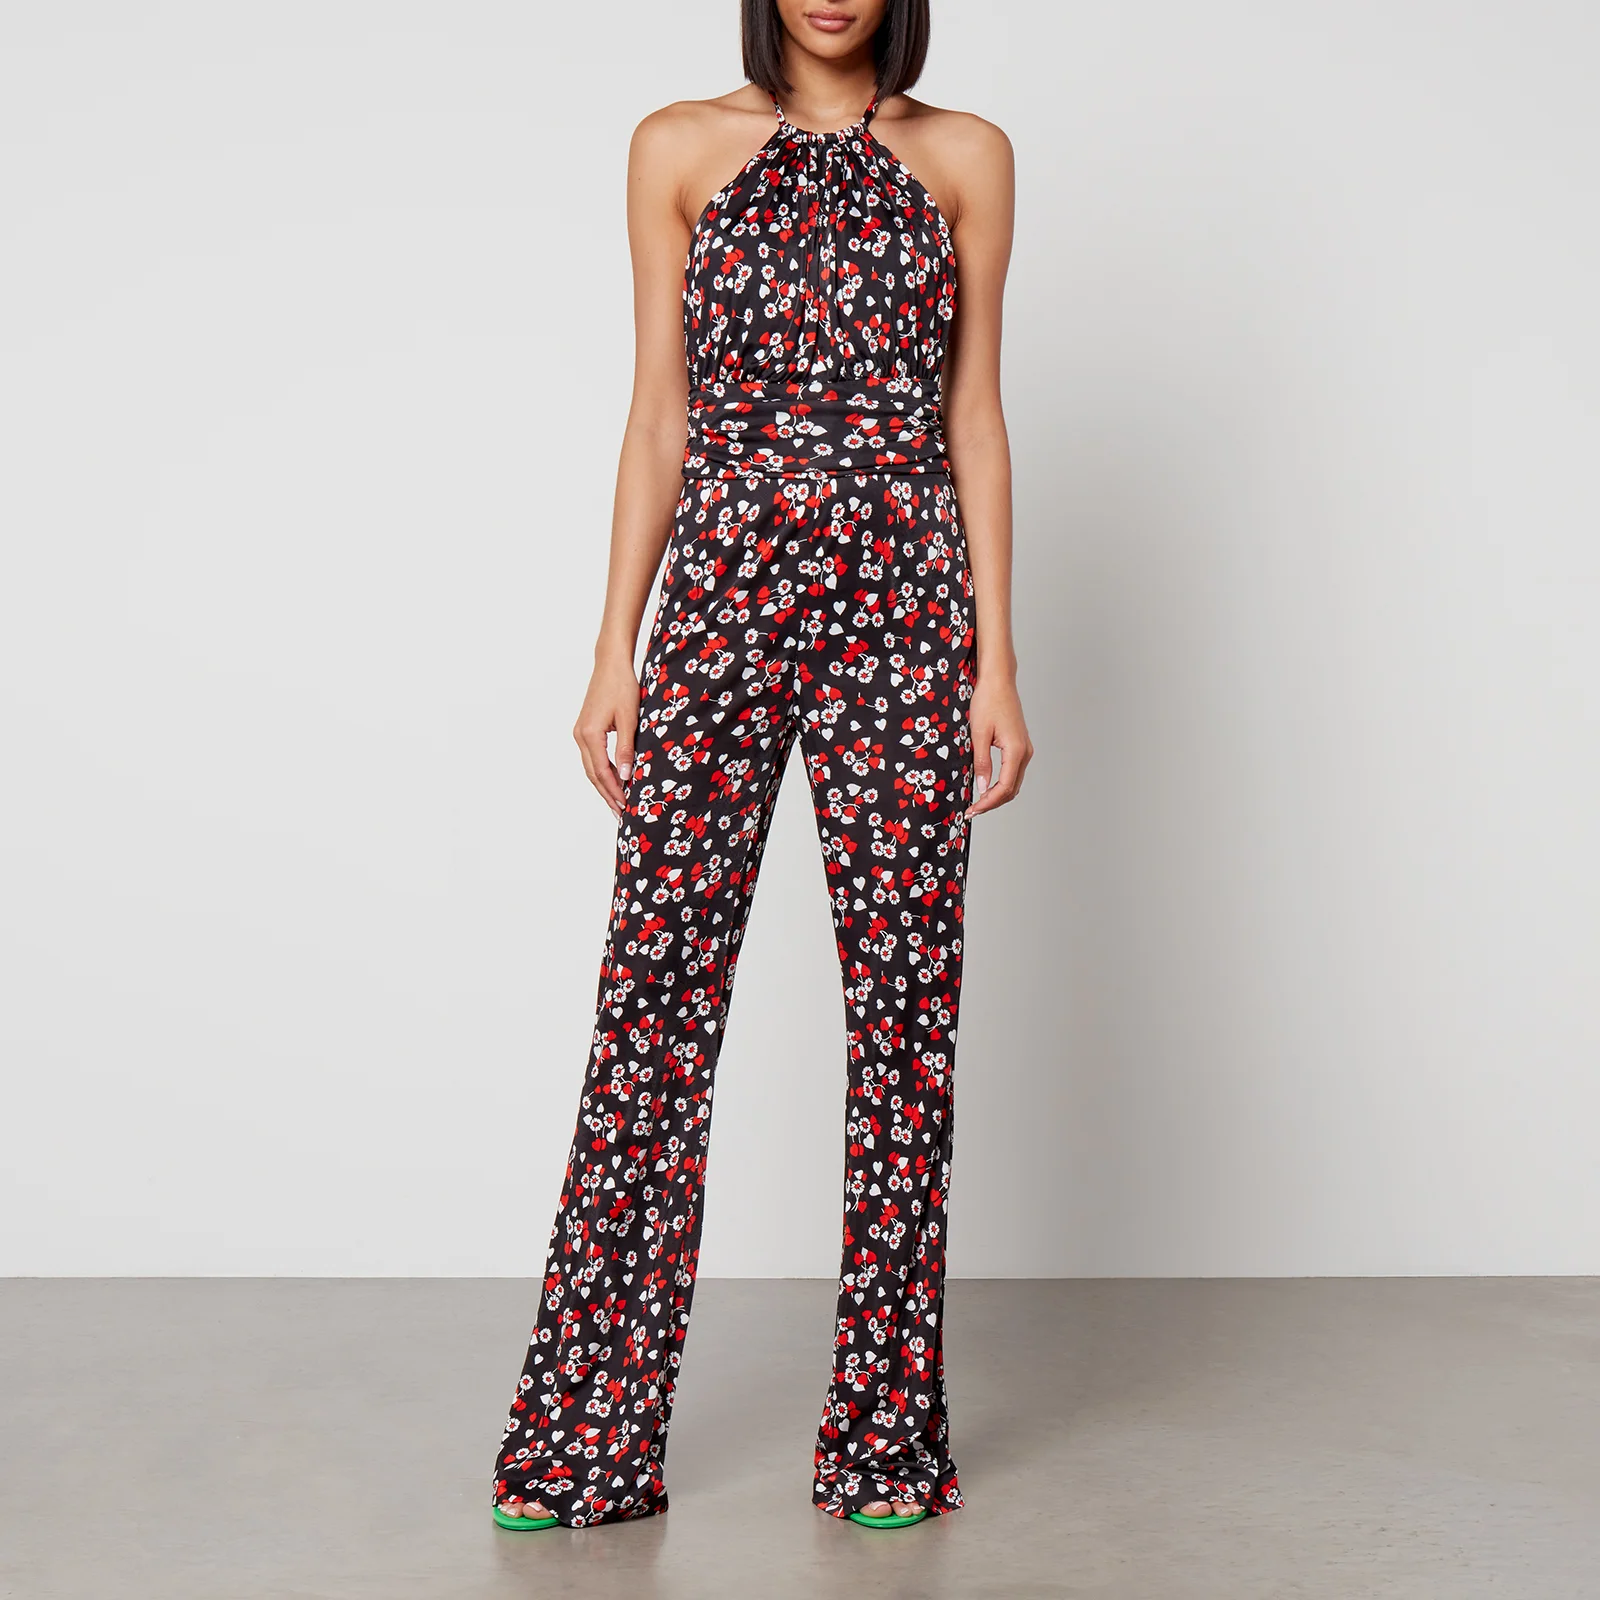 Moschino Floral Print Strech Jersey Jumpsuit Image 1